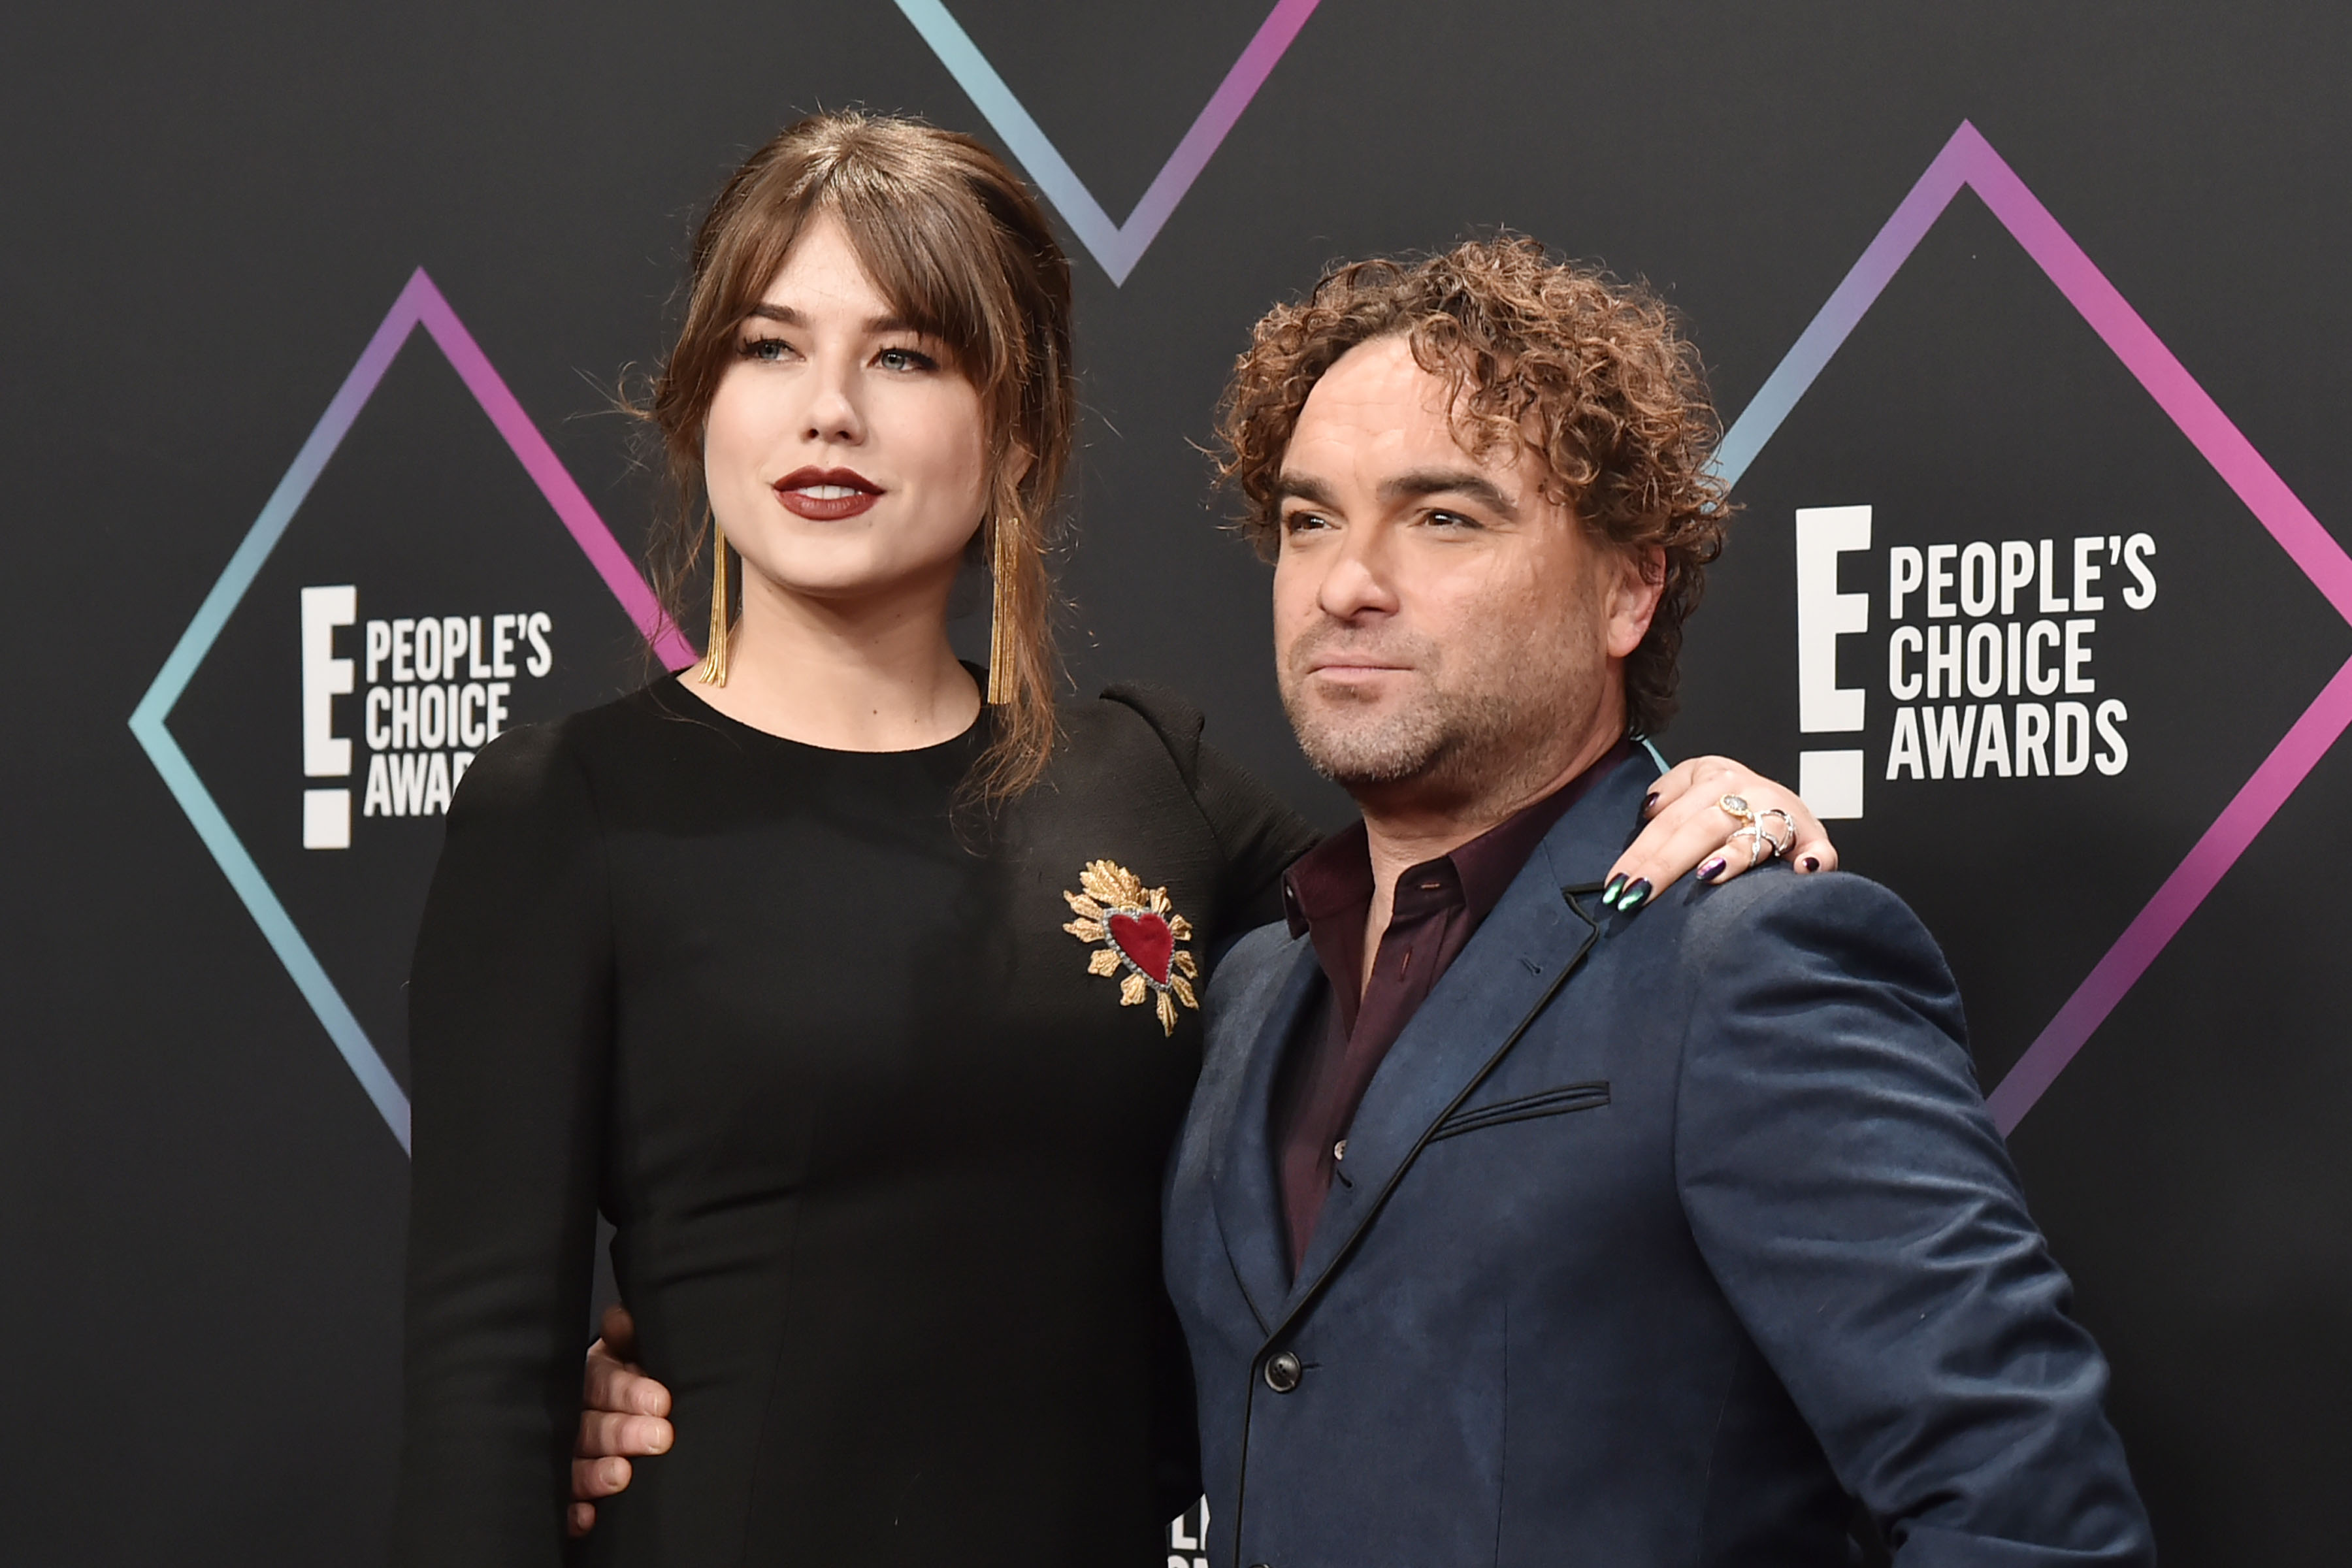 Alaina Meyer and Johnny Galecki arrive at the E! People's Choice Awards at Barker Hangar in Santa Monica, California on November 11, 2018. | Source: Getty Images